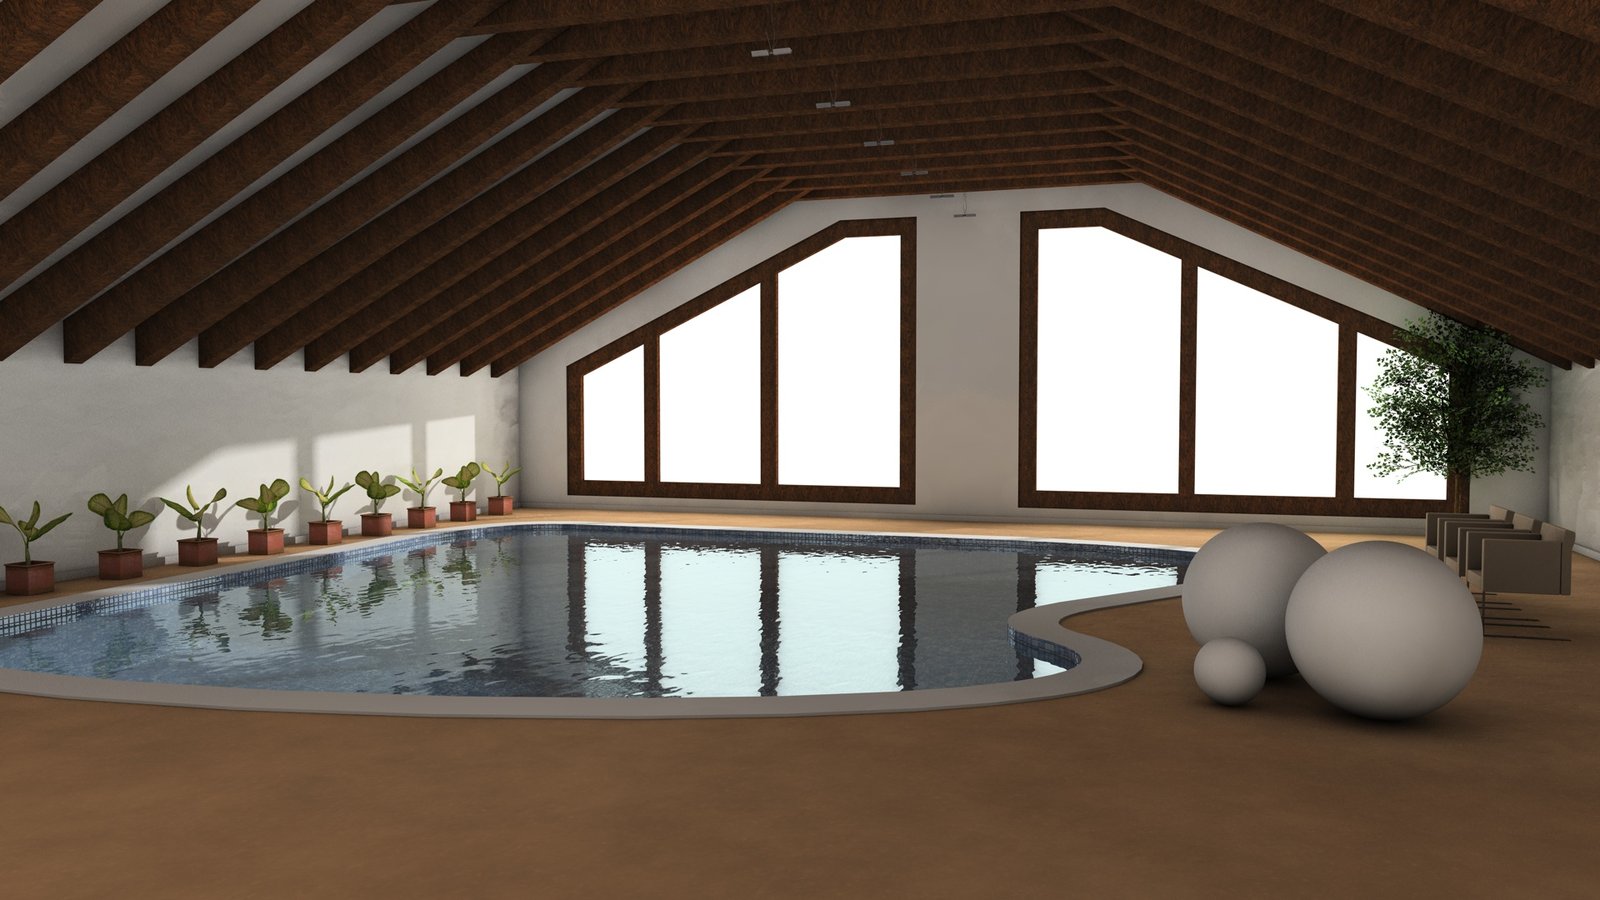 Indoor Swimming Using Custom Indoor Swimming Pool Design Using Unique Pool Shape Decorated With Wooden Log Ceiling And Unique White Furniture Pool Indoor Swimming Pool Covered In Awesomeness